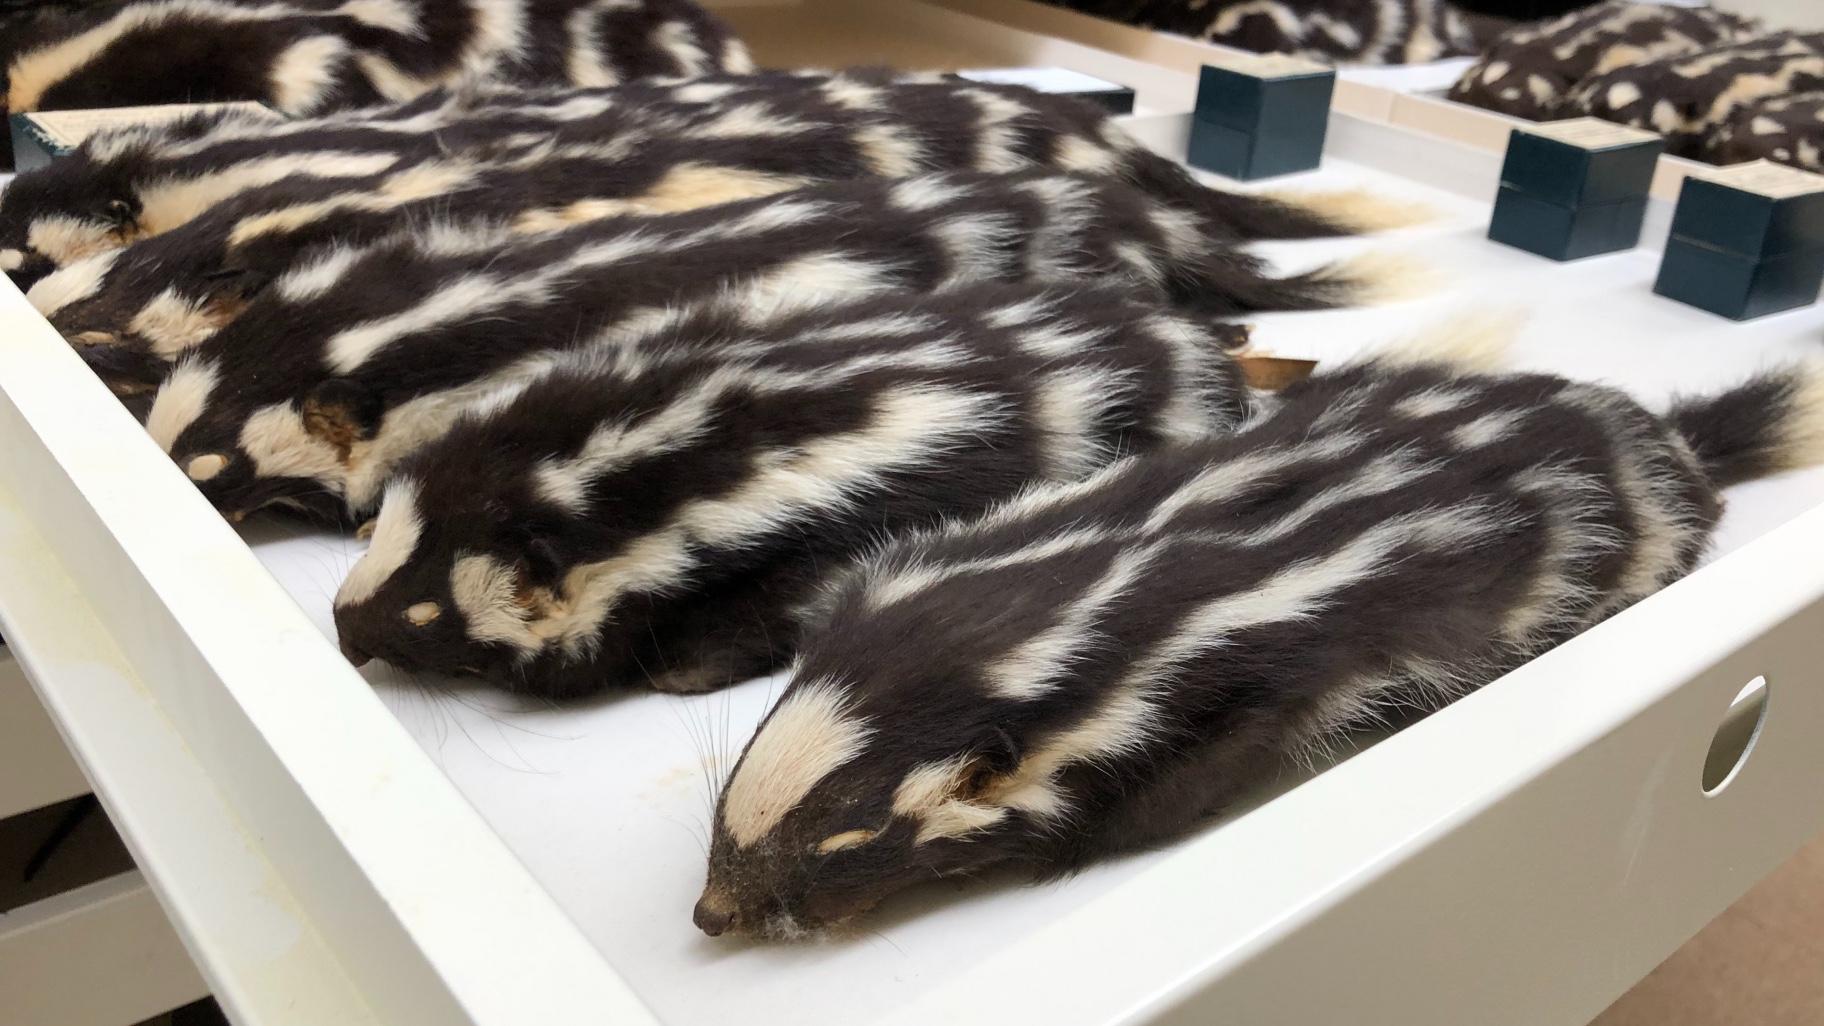 Spotted skunk specimens in the Field Museum's collection. DNA analysis revealed new species. (Patty Wetli / WTTW News)